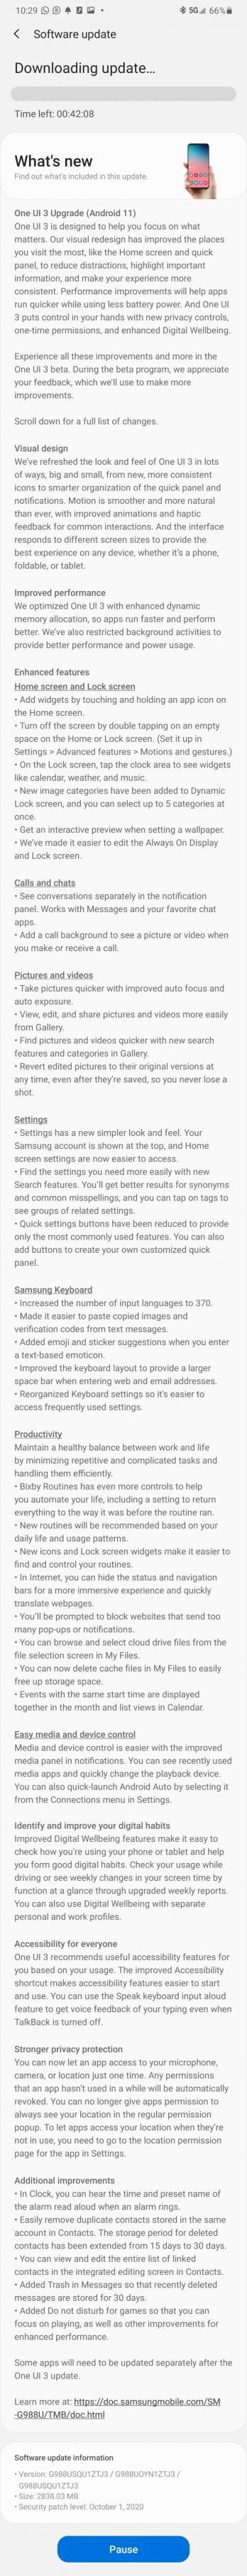 Samsung Galaxy S20, S20+ and S20 Ultra in the US now also getting One UI 3.0 beta